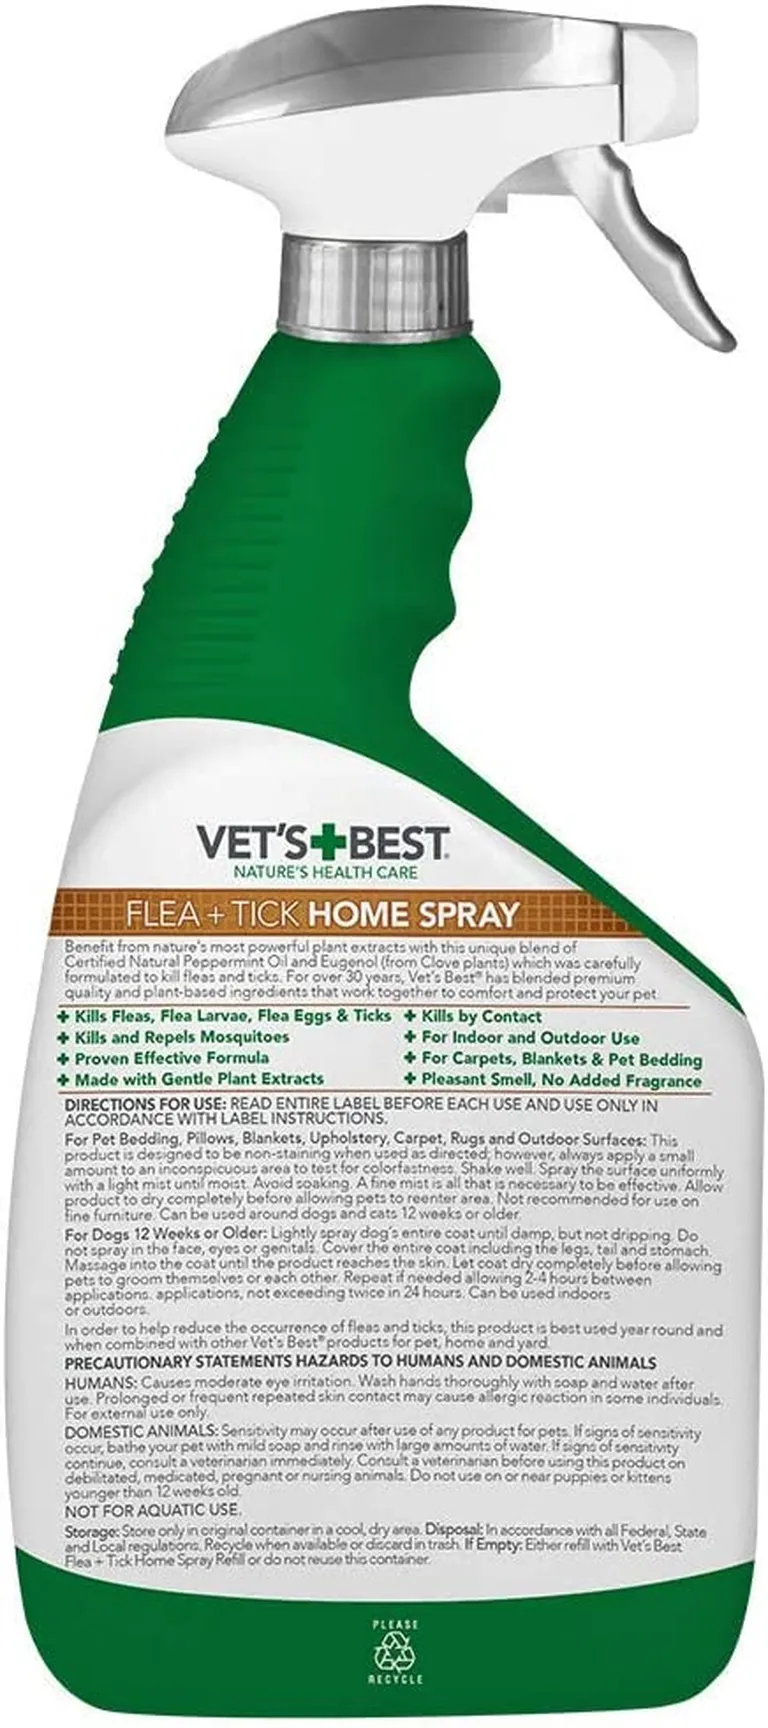 Vets Best Flea and Tick Home Spray Photo 2